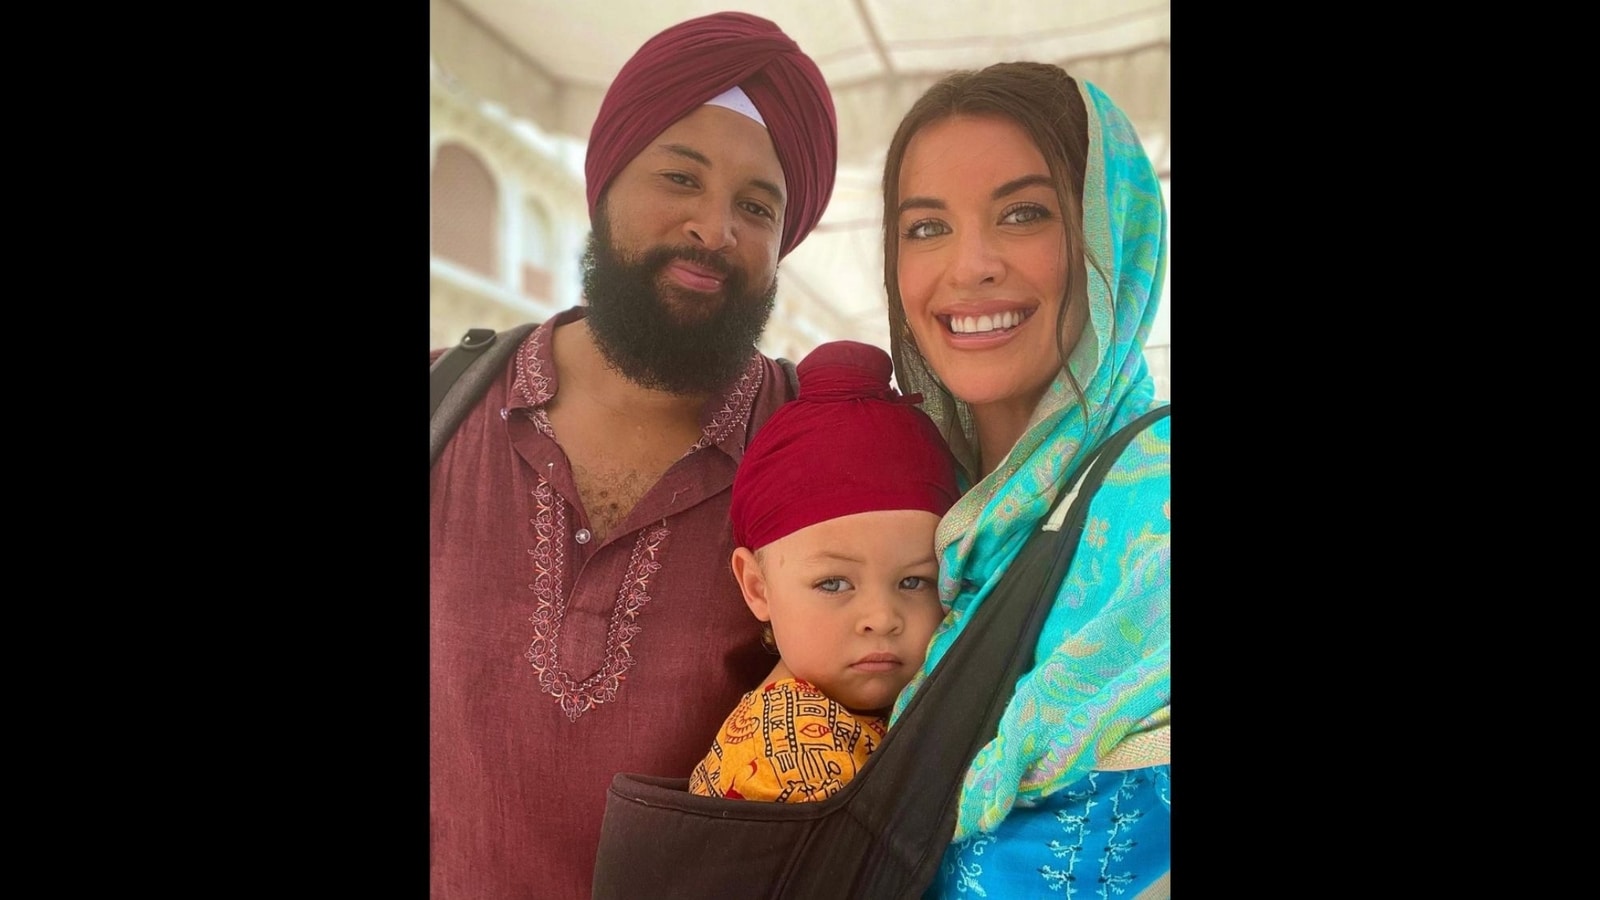 Foreigners tie turbans before visiting Amritsar’s Golden Temple. Watch viral video